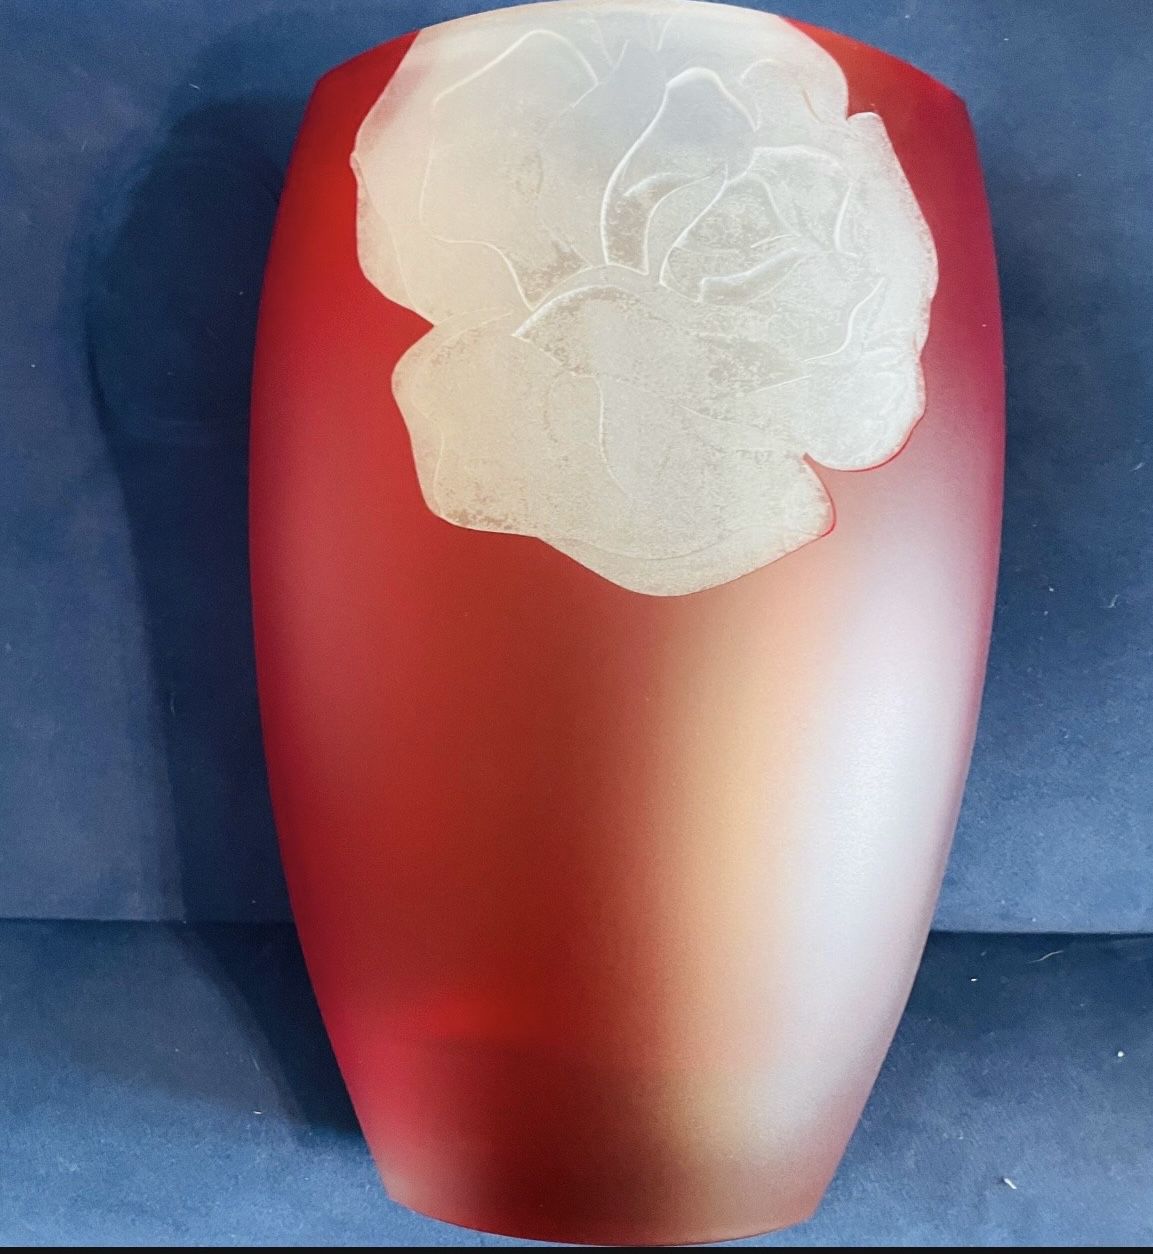 Mikasa, 12" Ellipse Vase. with Love. QP 216 630. Red with an etched white flower